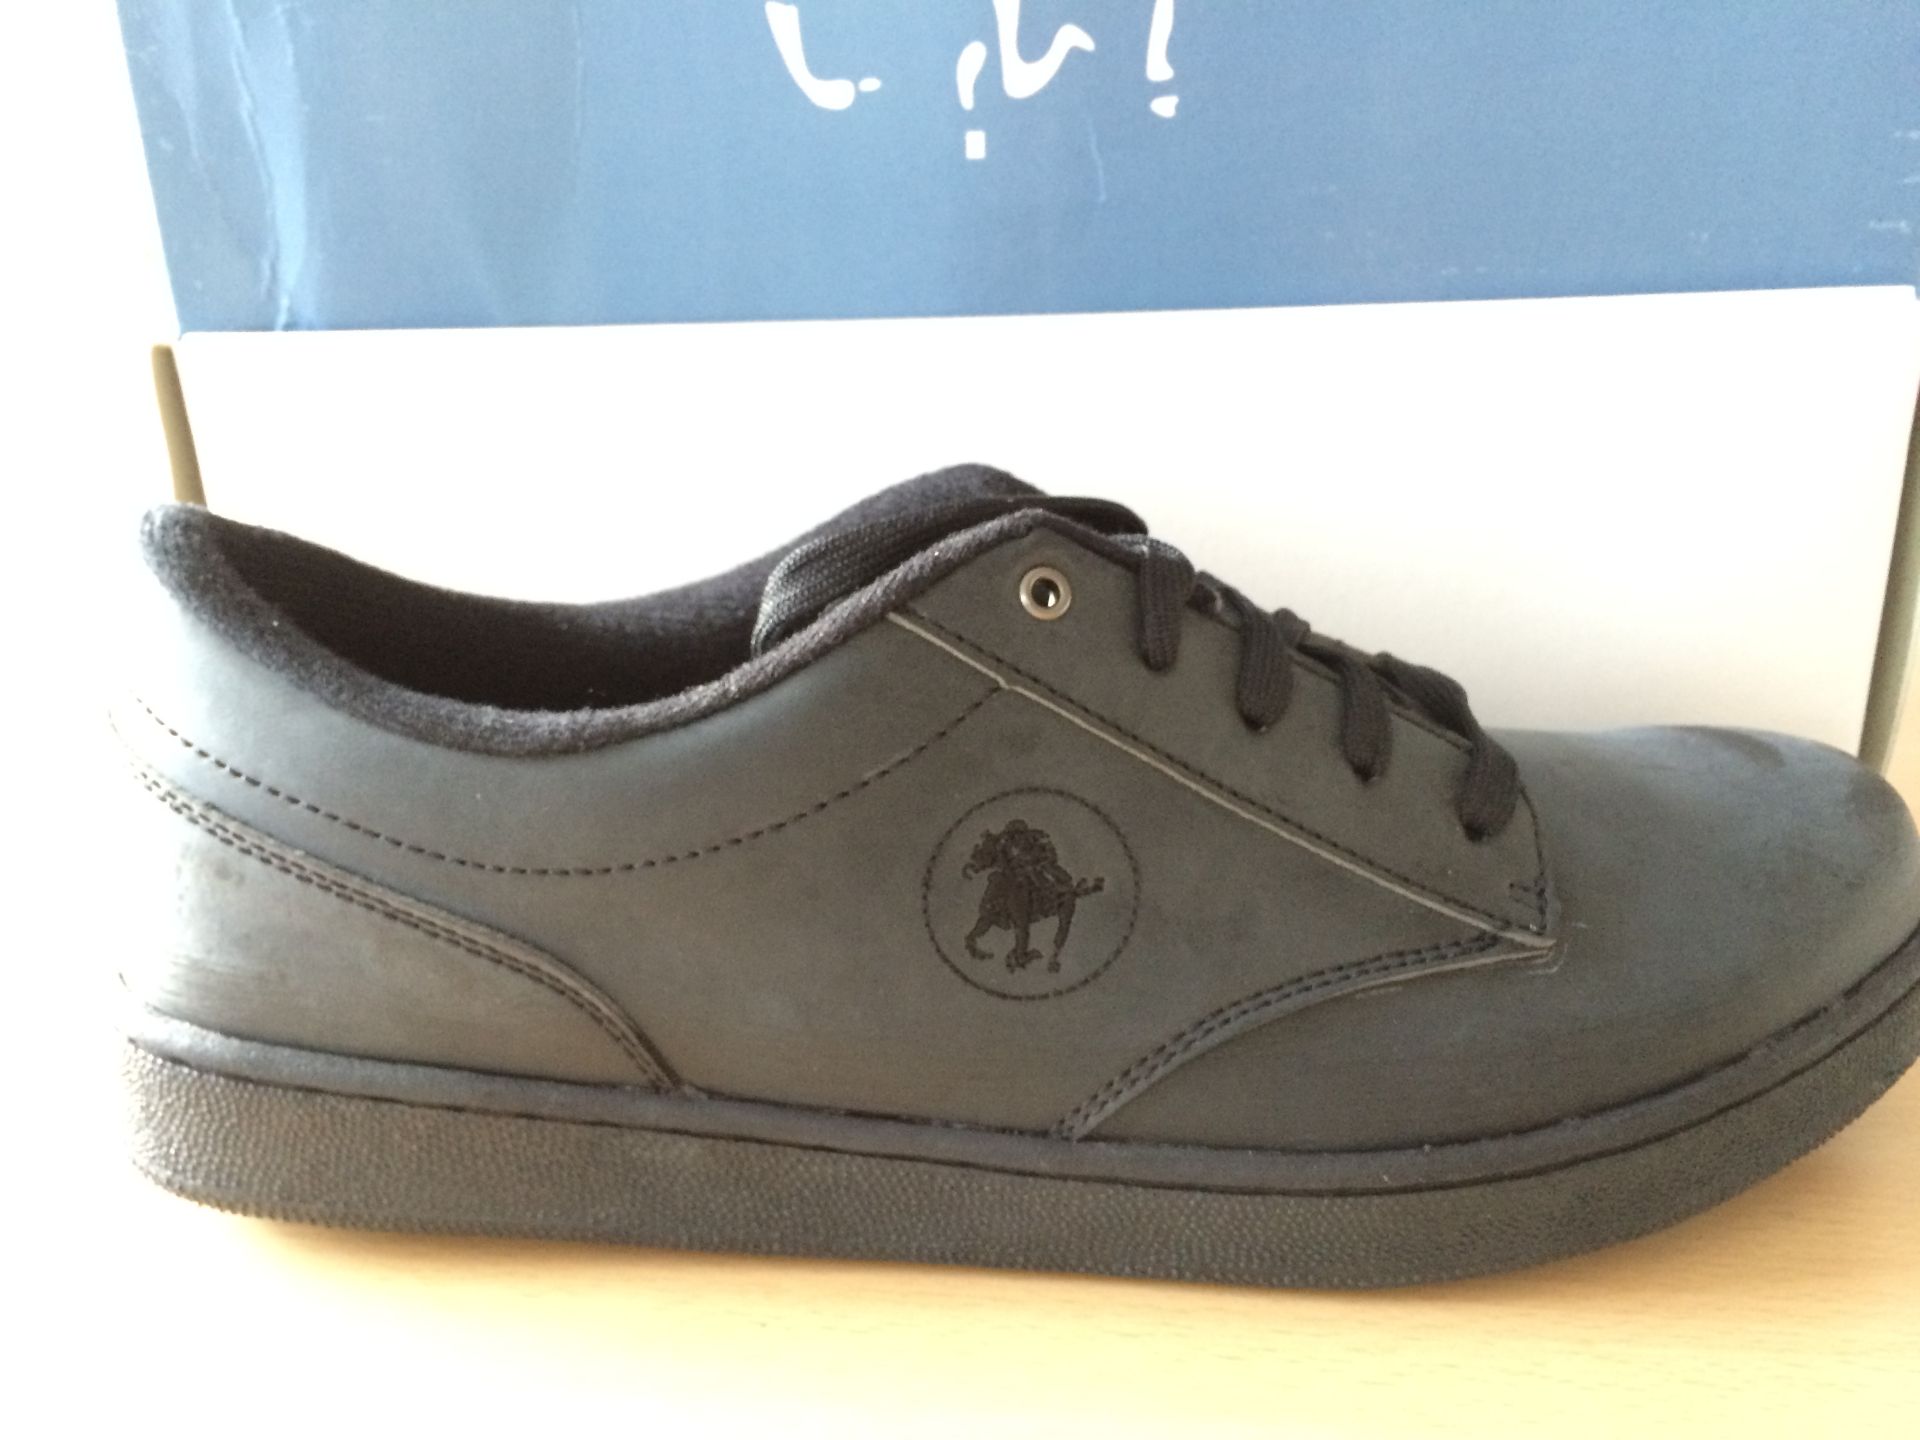 Box To Include Approx. 12 Childrens US Collection Trainers in Black; Children's Sizes 7-10 - Image 2 of 3